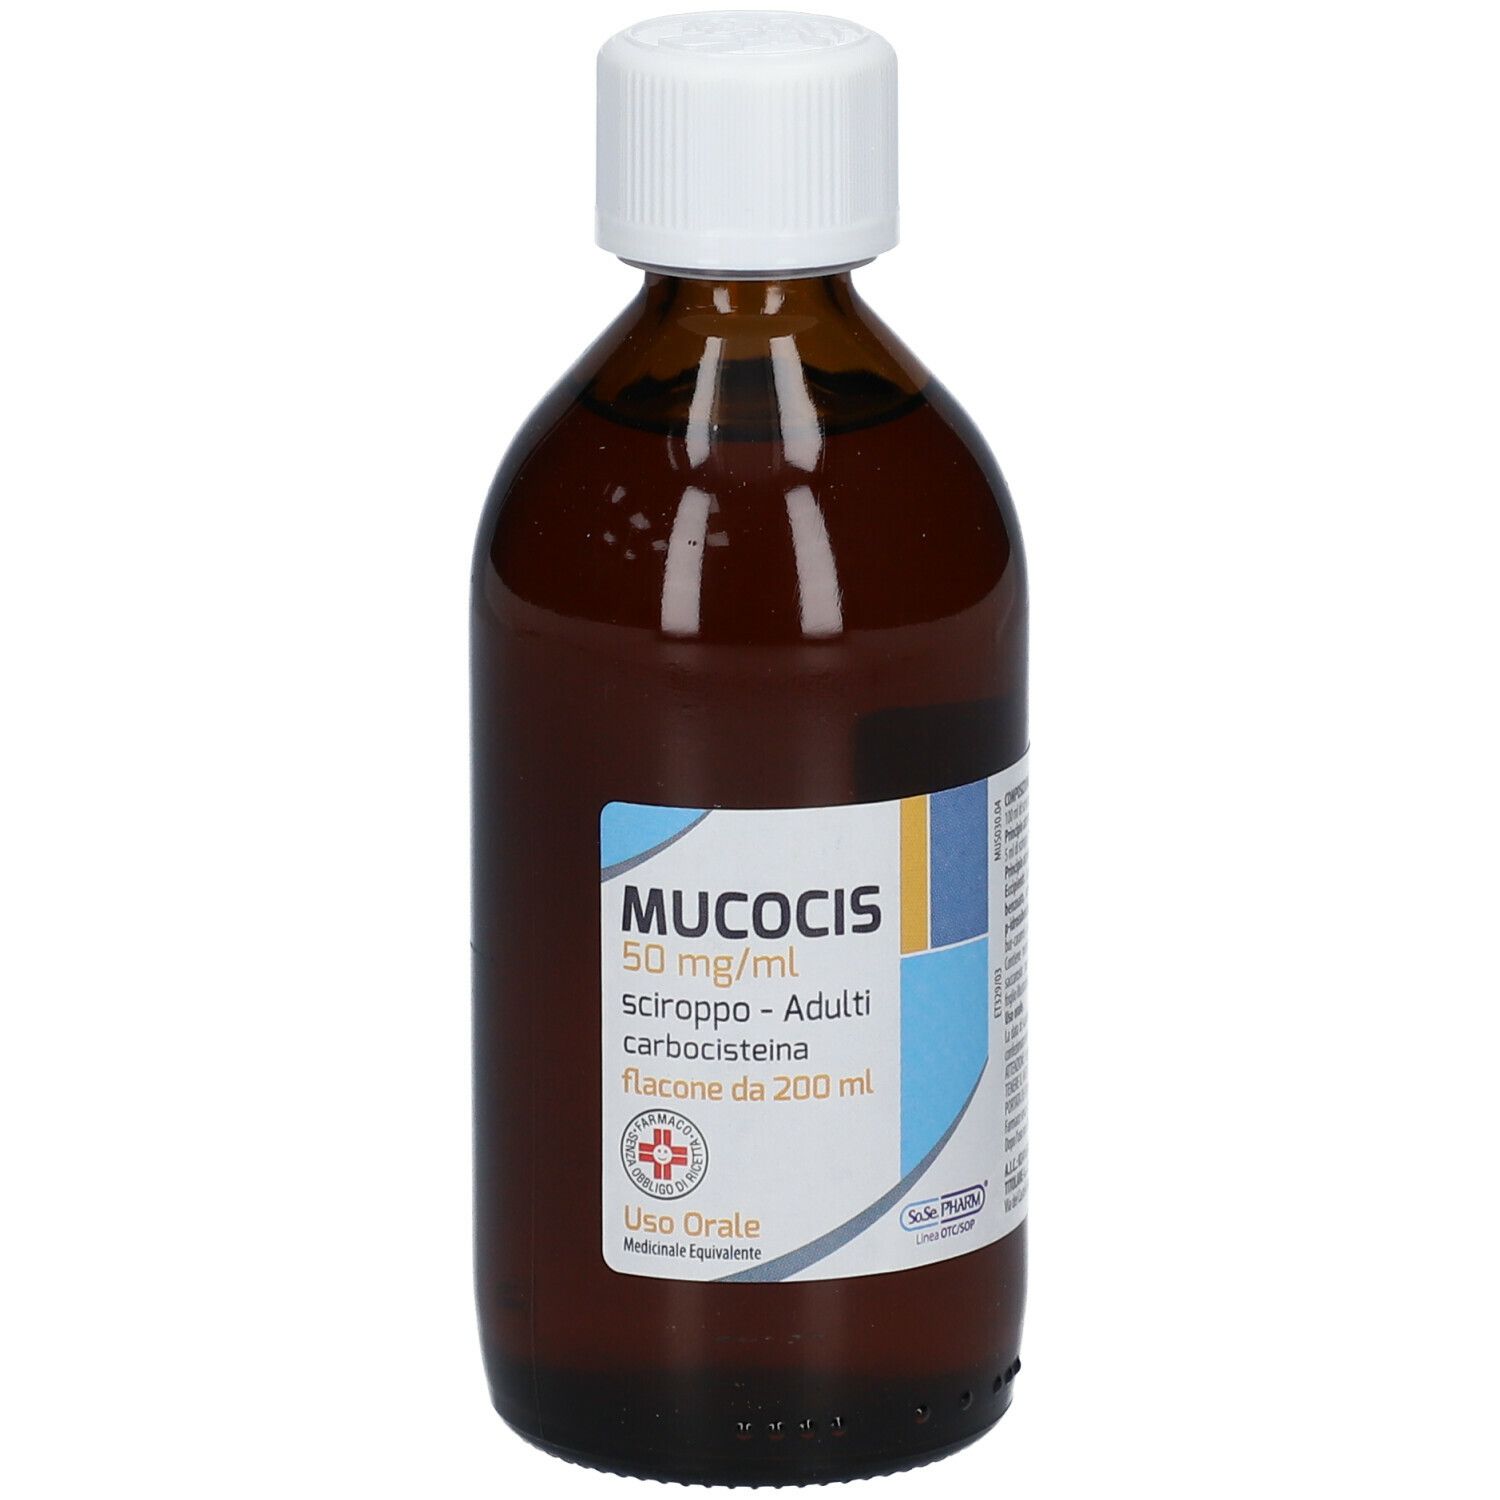 Image of MUCOSIS Adulti 50 mg/ml Sciroppo